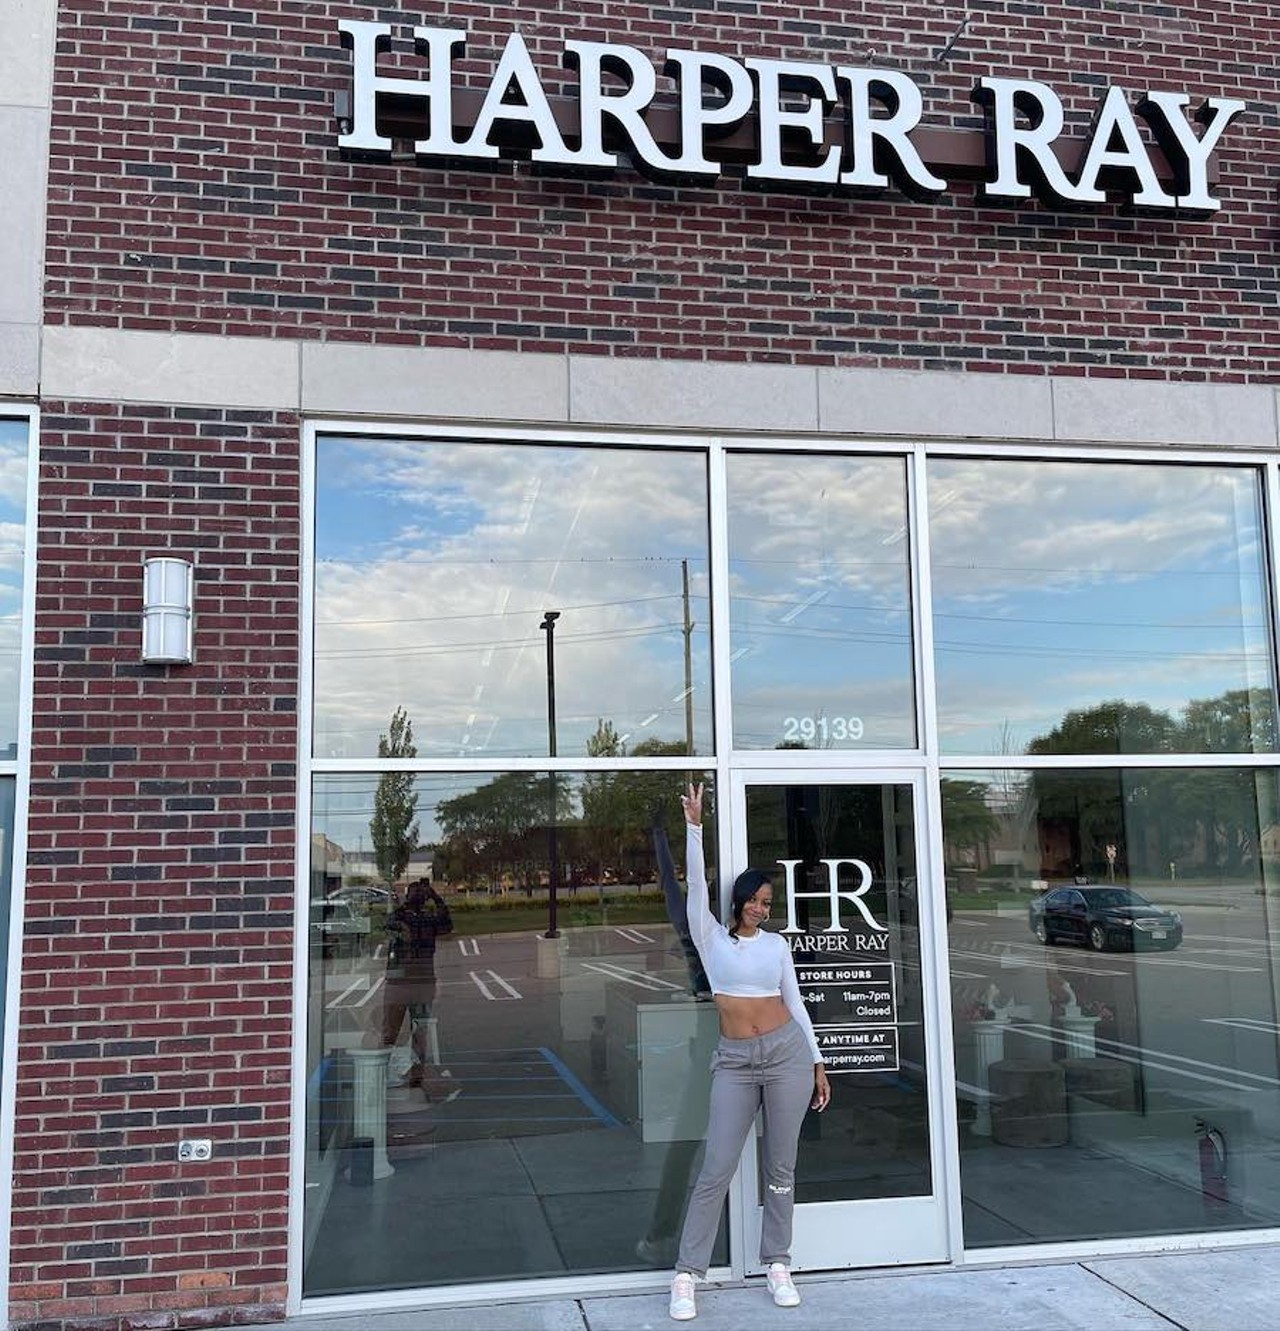 Harper Ray Accessories
29139 Southfield Rd., Southfield; 248-595-7099; shopharperray.com
Kash Doll once said "Ice Me Out," and at Harper Ray, every true Detroit girl gets to live out her iciest dreams for a fraction of the cost.